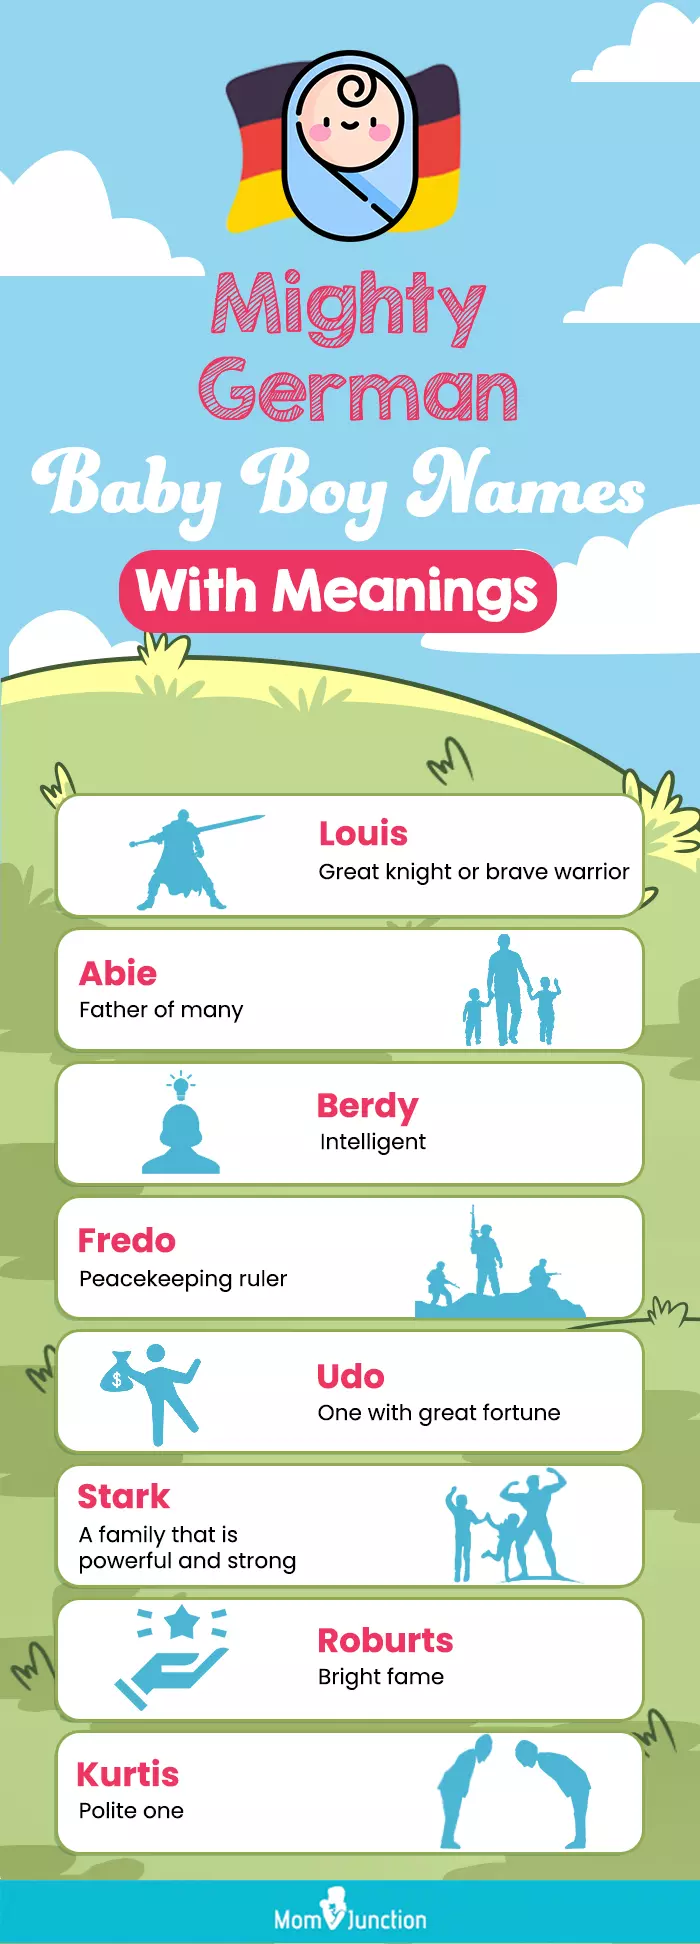 german baby boy names with meanings (infographic)